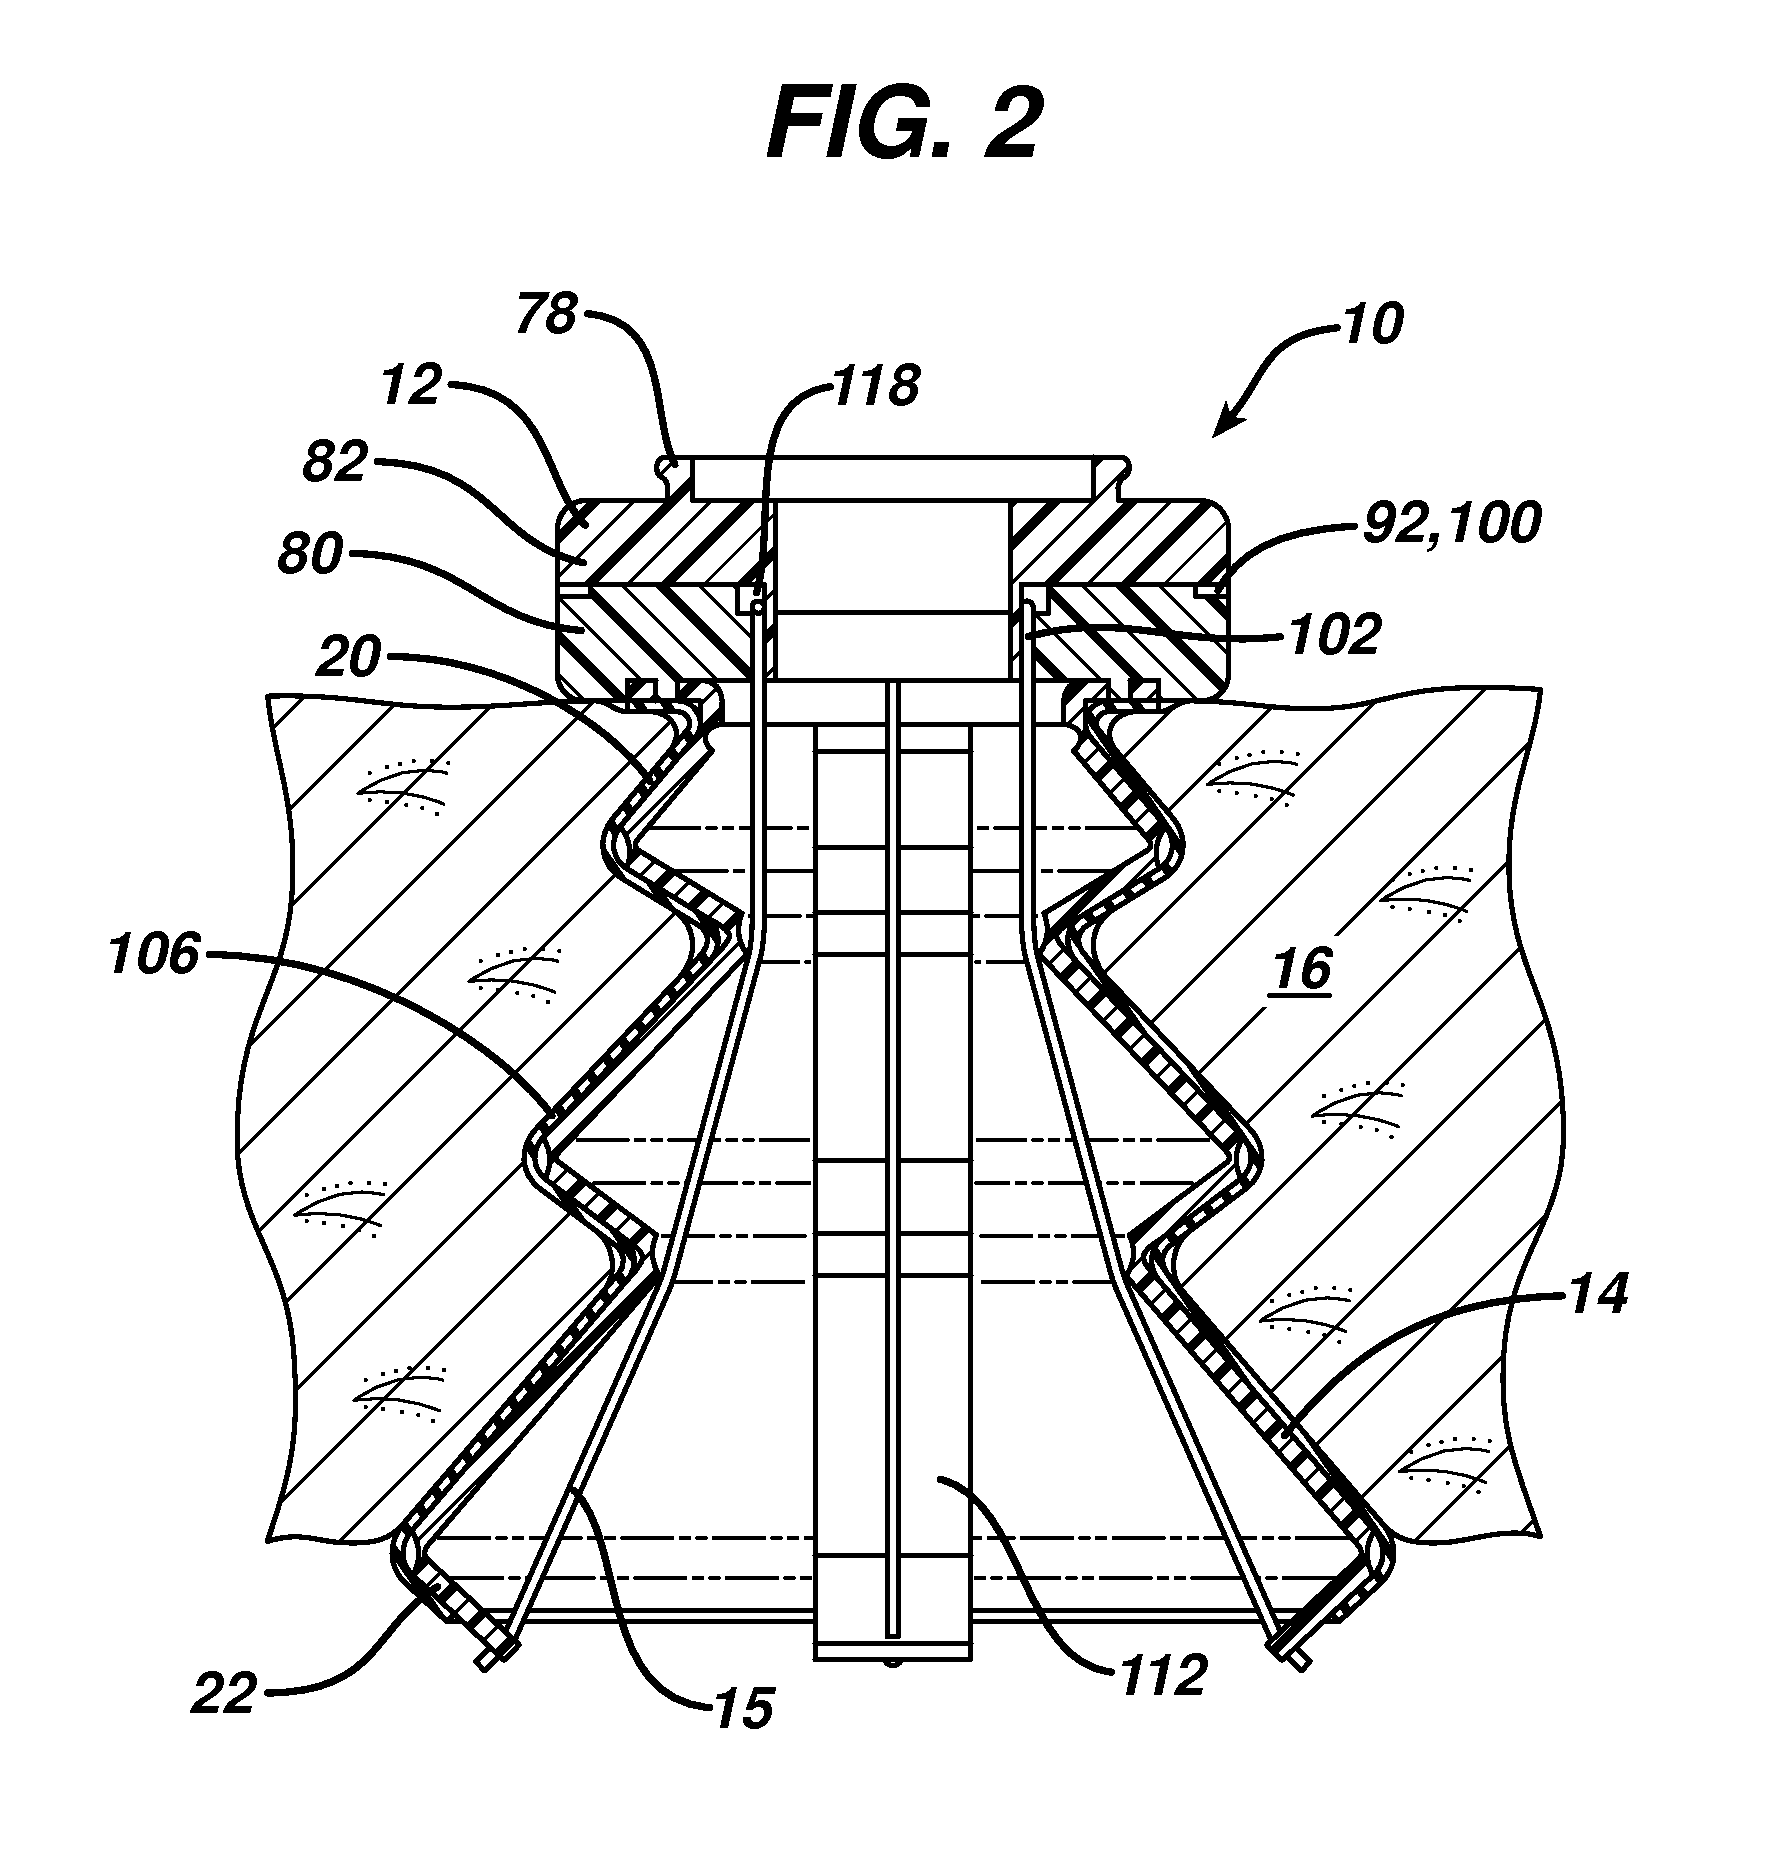 Inverted conical expandable retractor